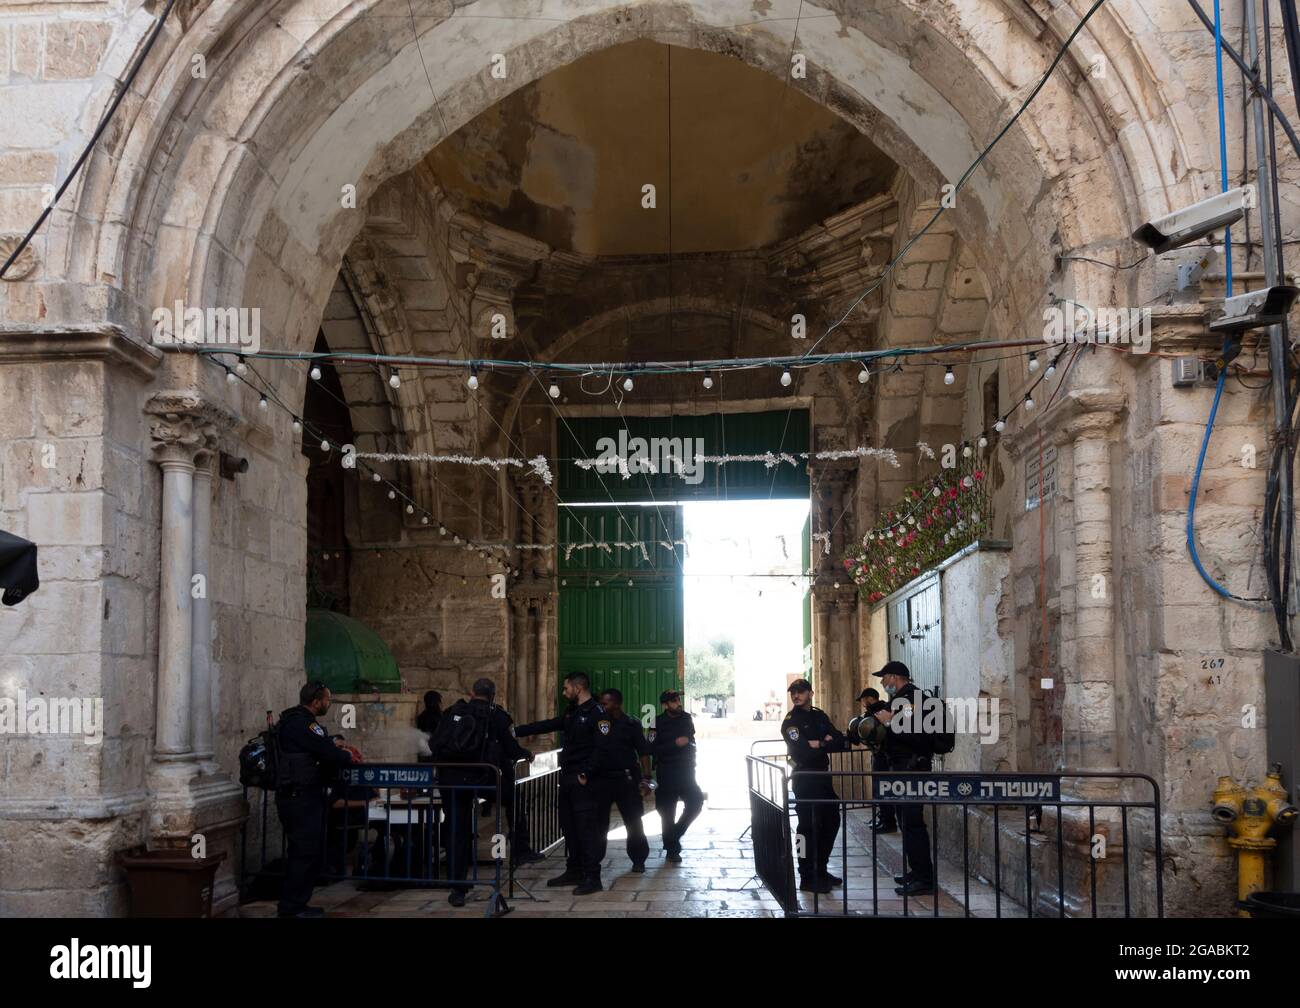 Israeli Police stand guard at the Chain Gate (Arabic, Bab as-Silsileh ) located on the western flank of the Temple Mount known as The Noble Sanctuary and to Muslims as the Haram esh-Sharif in the Old City East Jerusalem Israel Stock Photo